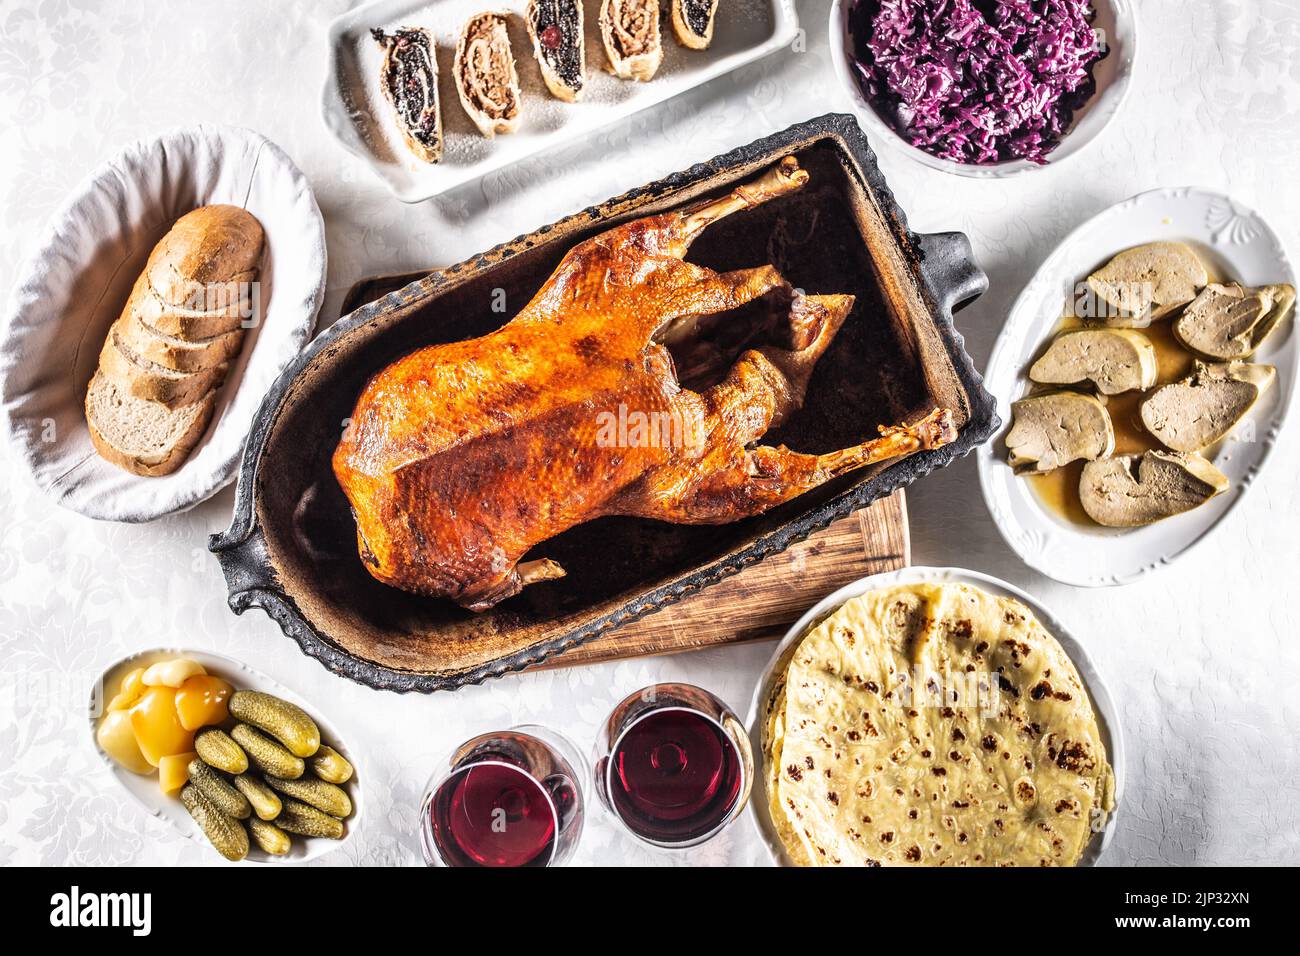 Roast goose with side dishes, red cabbage, roast, strudel, potato dumplings, pickles, bread and red wine. Traditional holiday food. Top view. Stock Photo